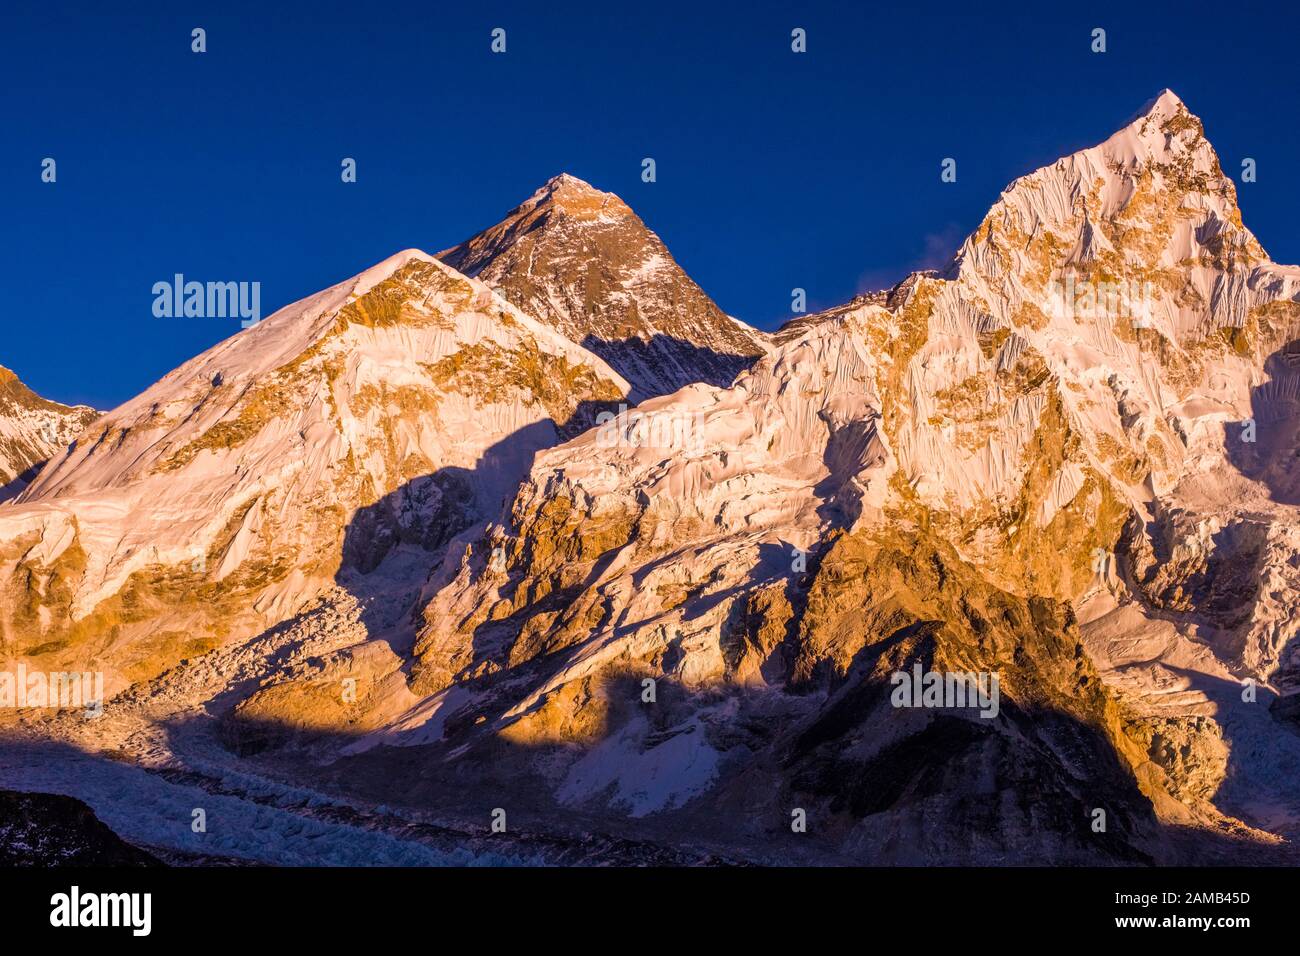 The summit of Everest, the worlds highest mountain,in the Khumbu region of the Nepal Himalayas, seen from Kala Patthar Stock Photo